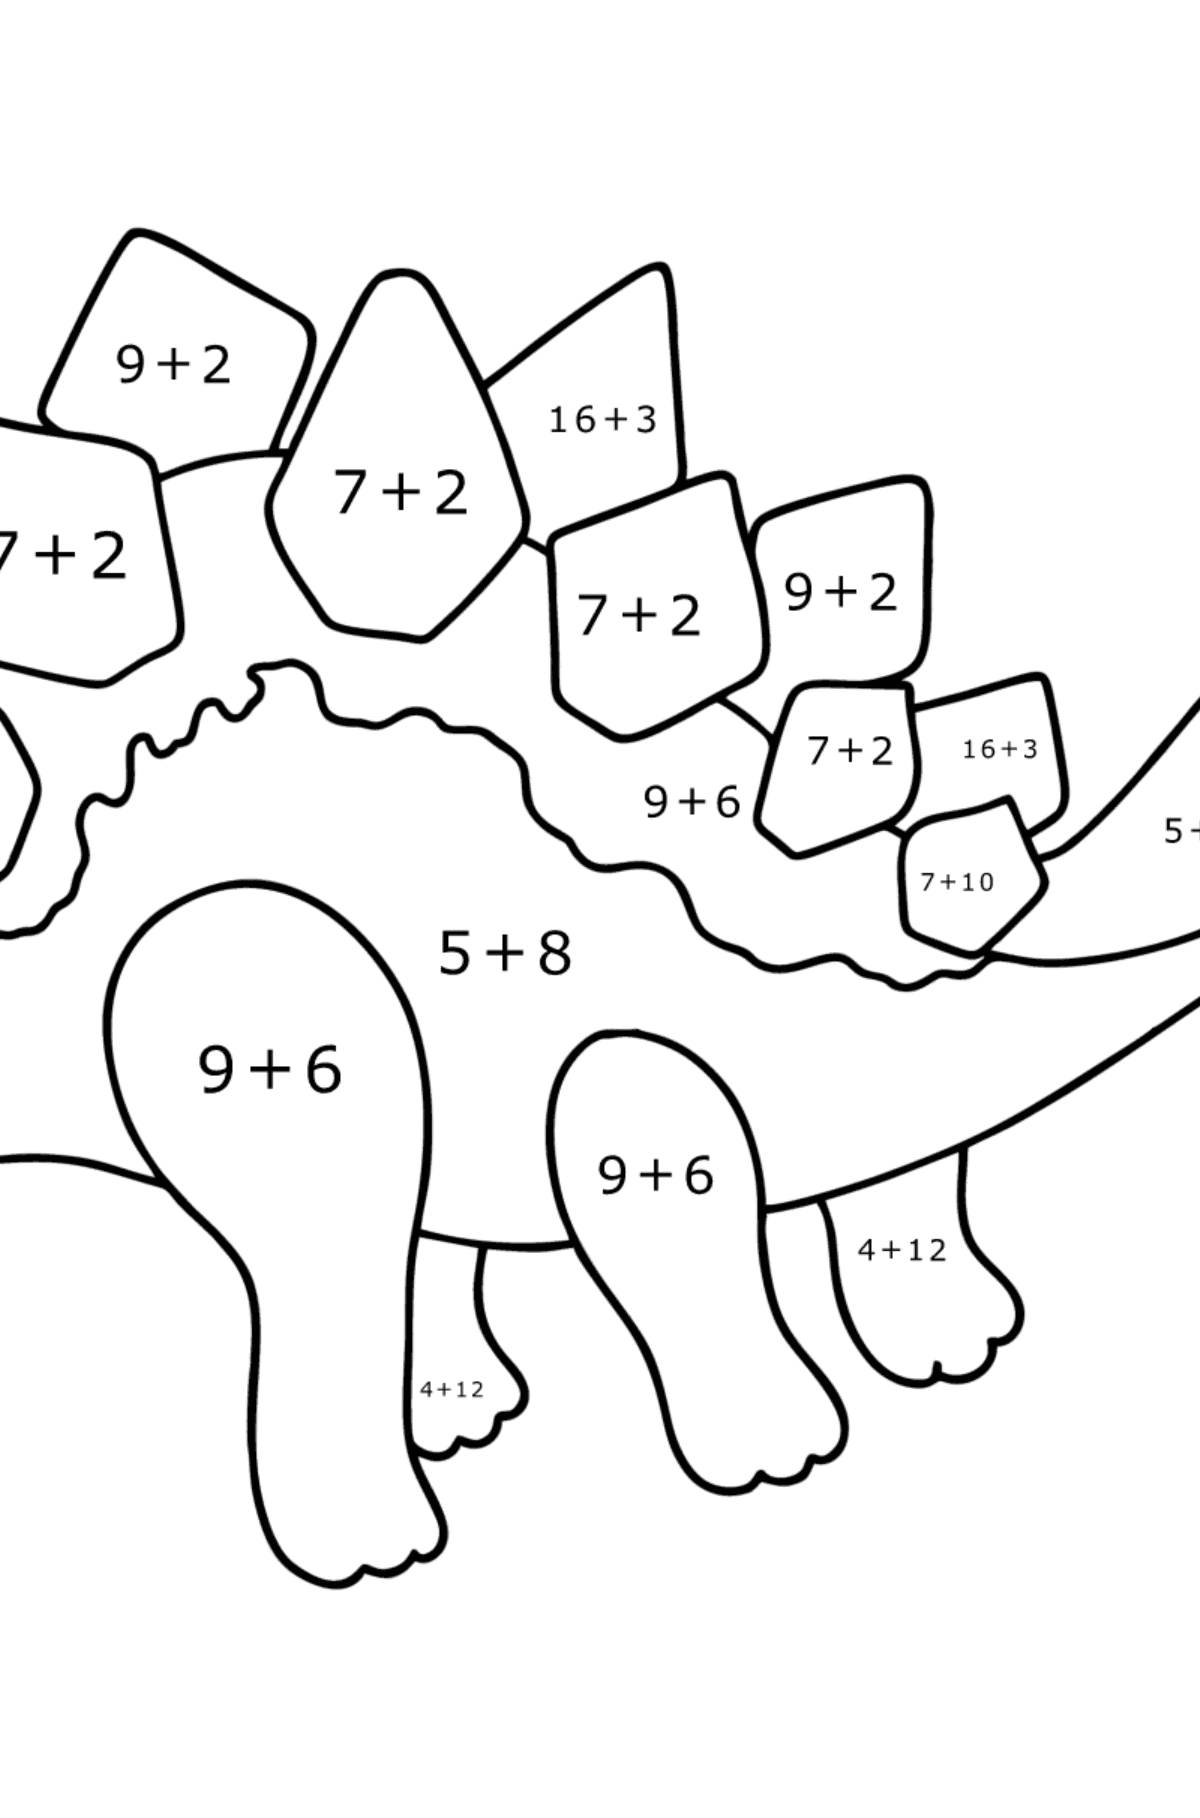 Stegosaurus coloring page - Math Coloring - Addition for Kids